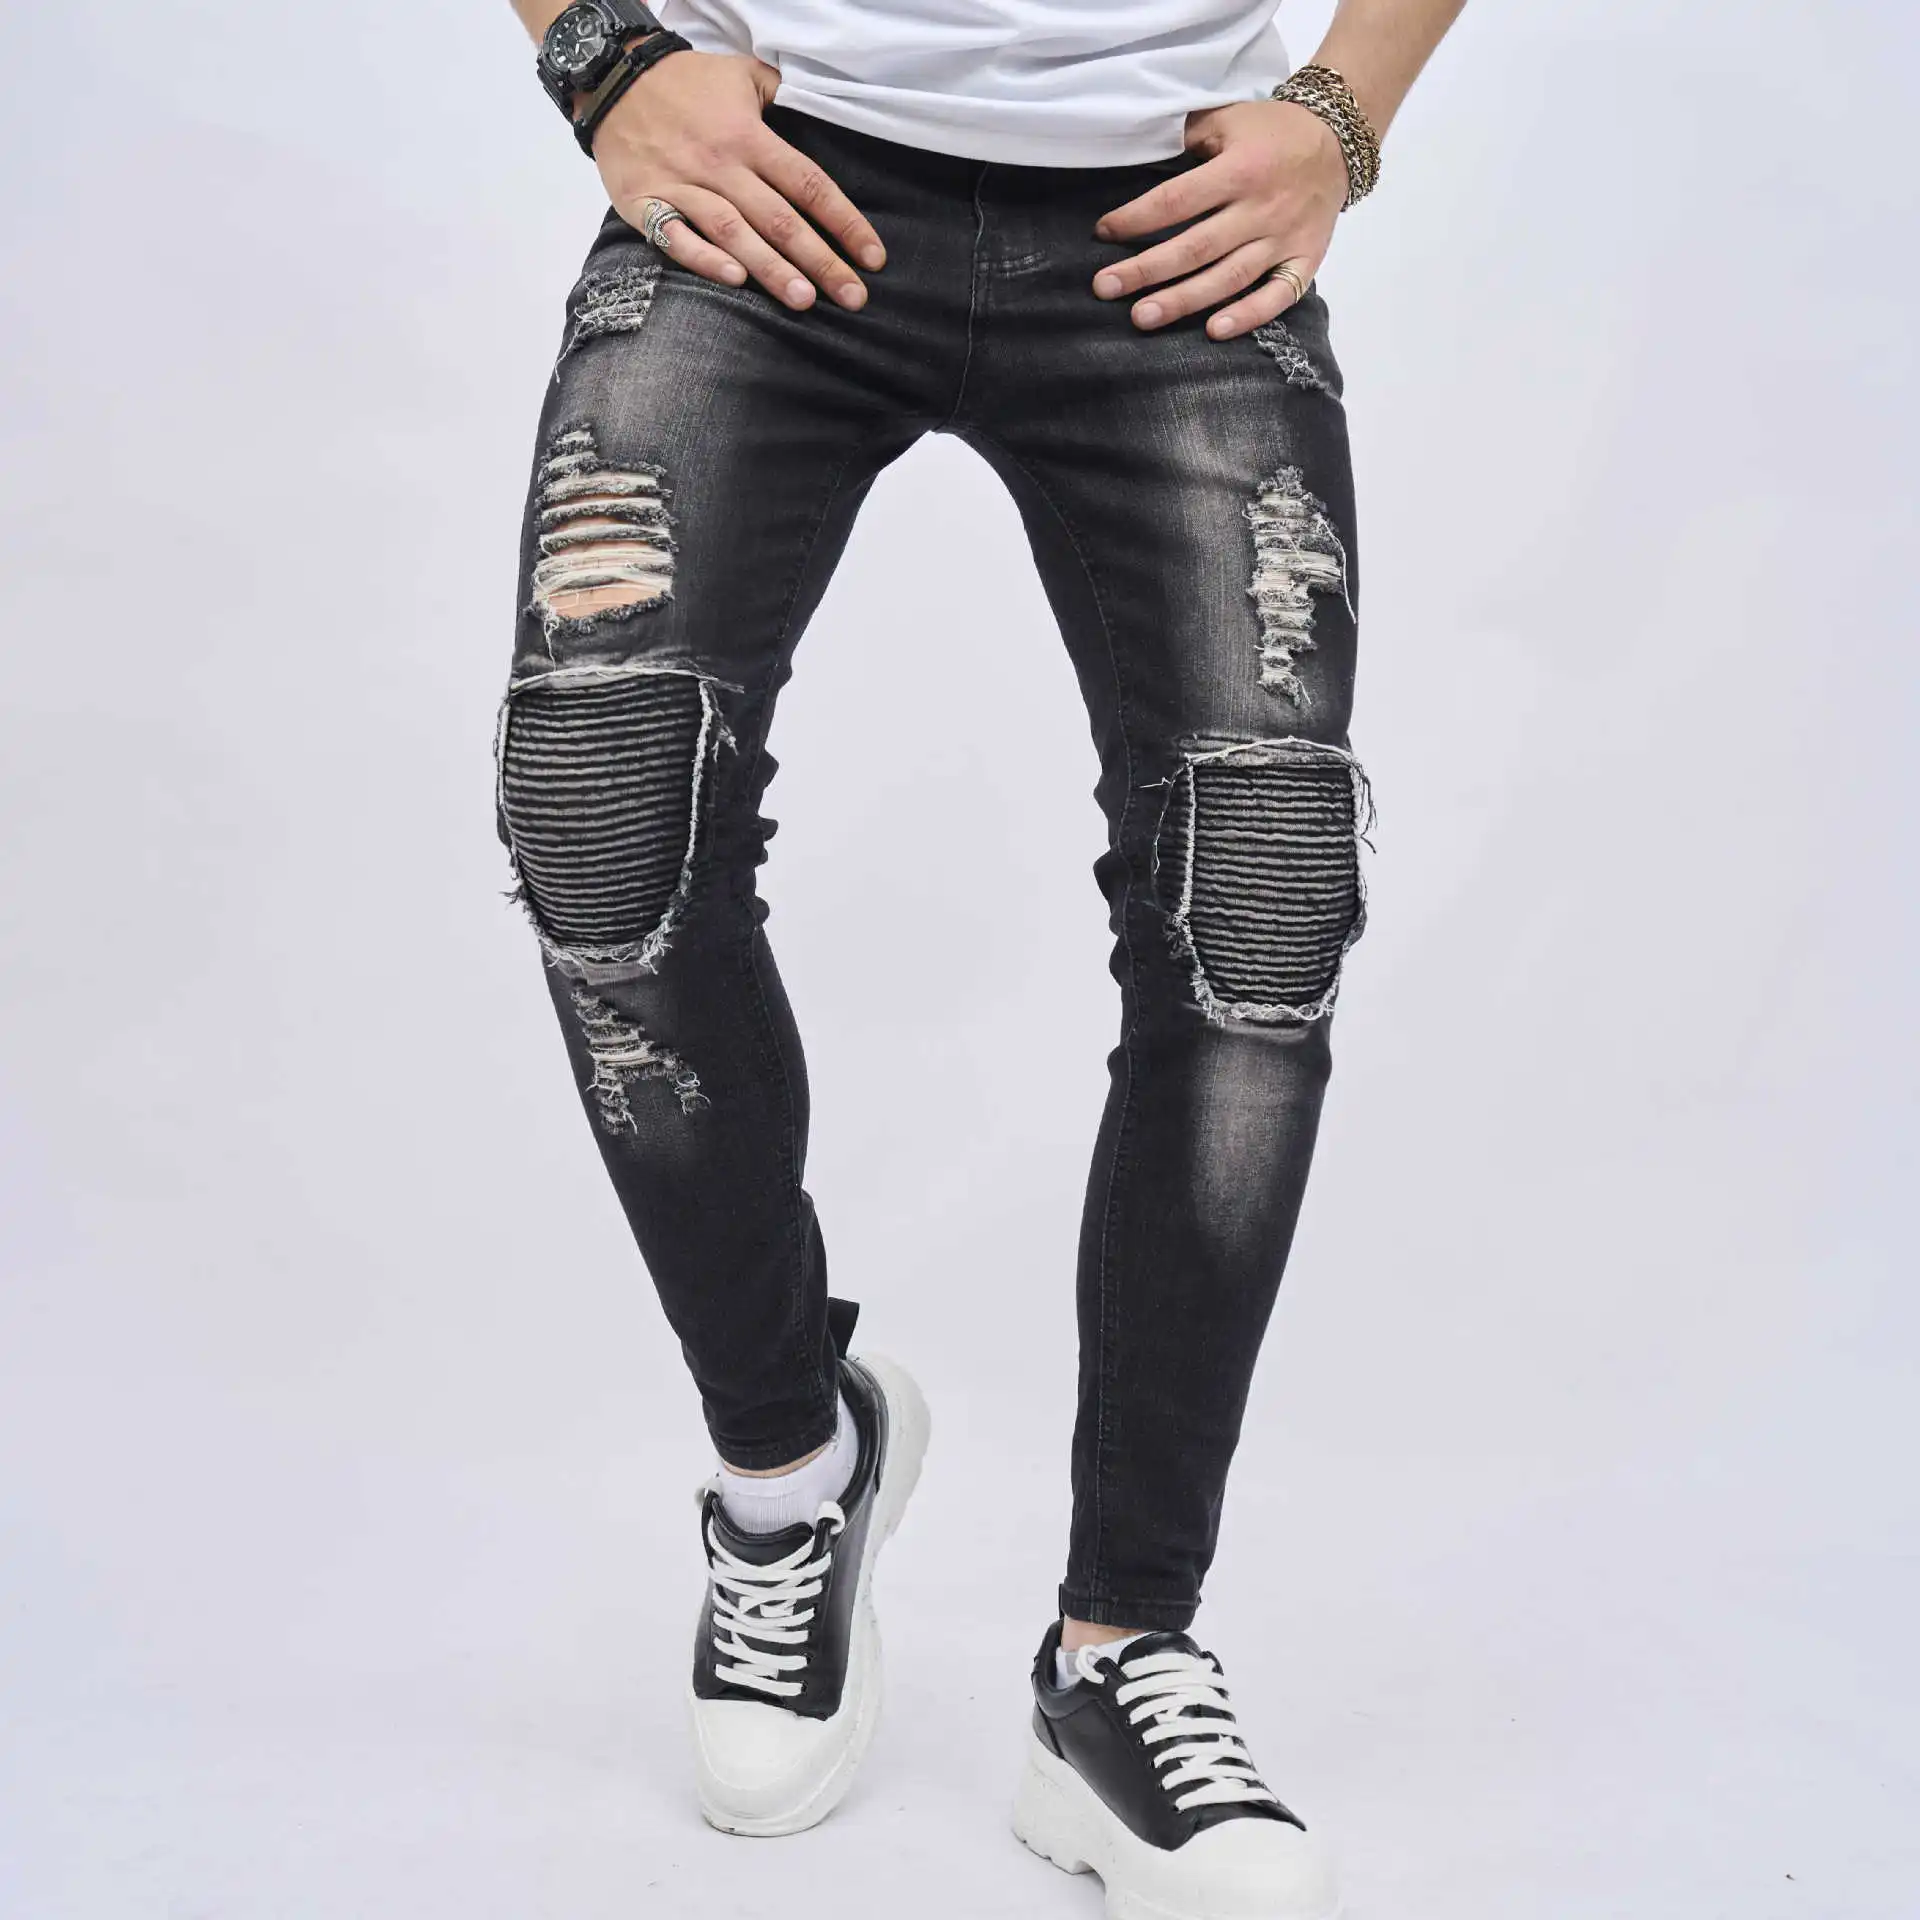 

Men's Destroyed Biker Jeans Pants Slim Fit Stretchy Ripped Motorcycle Denim Trousers With Holes High Streetwear Bottoms